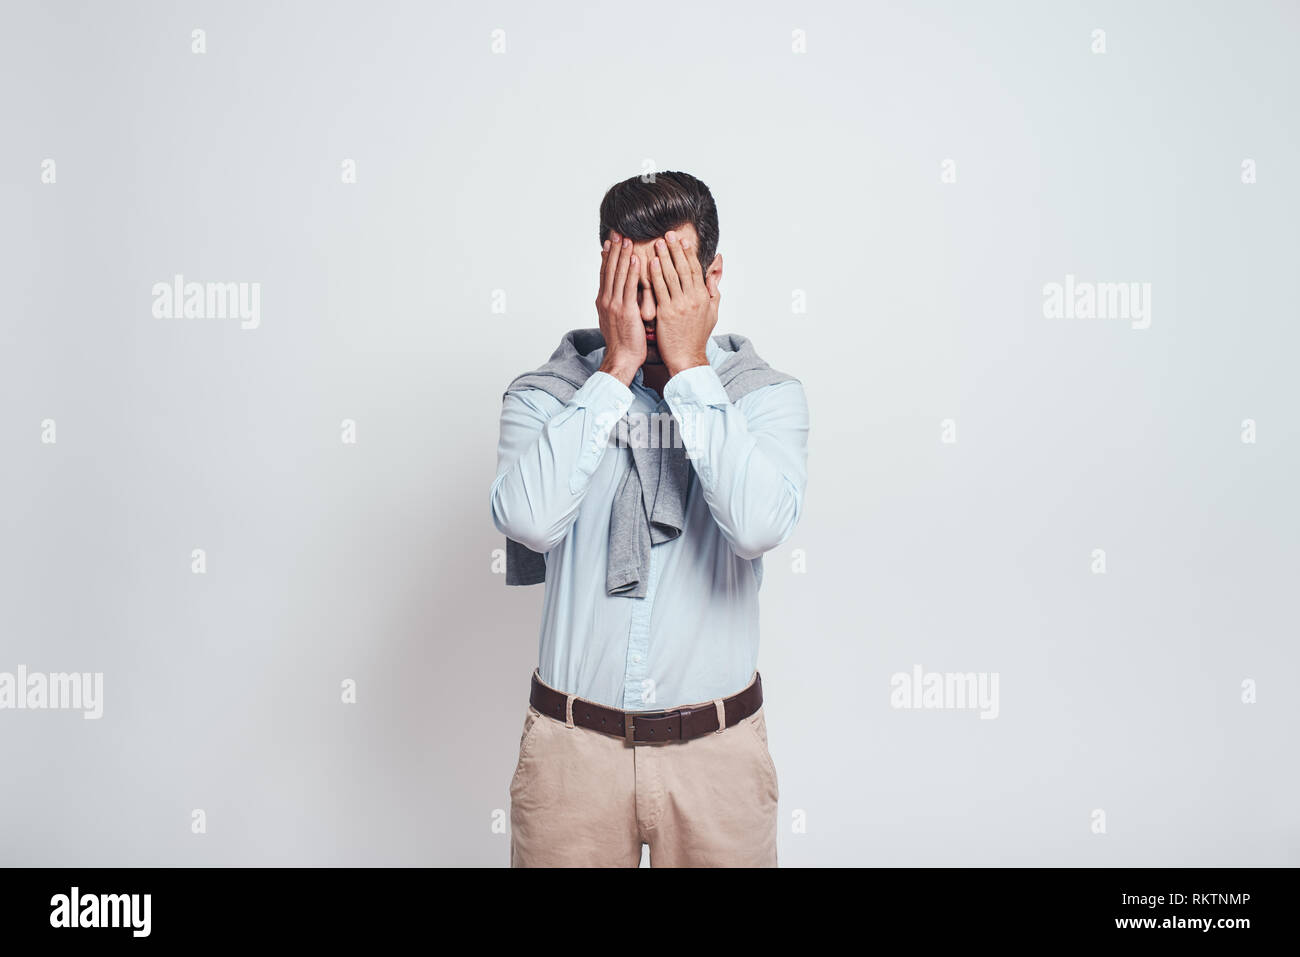 What did i do. Close-up portrait of disappointed man closing eyes with his hands on a grey background. Stress concept. Emotion expression. Stock Photo